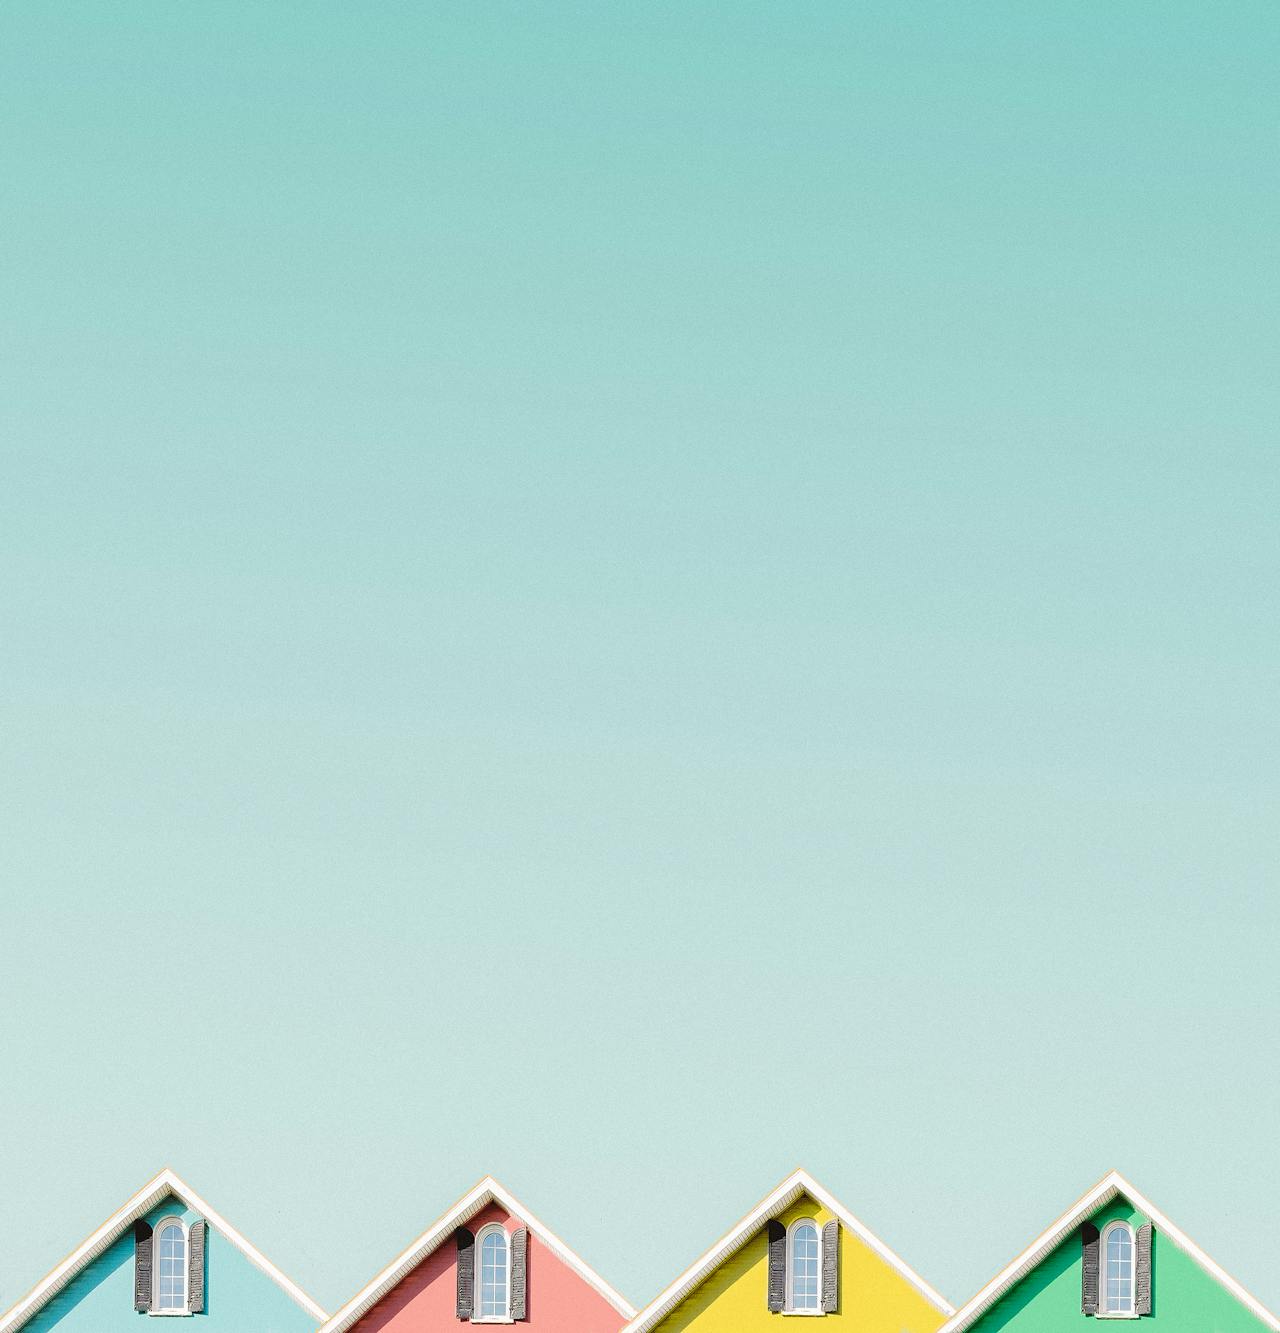 The top of 4 colorful houses. Image by Pexels